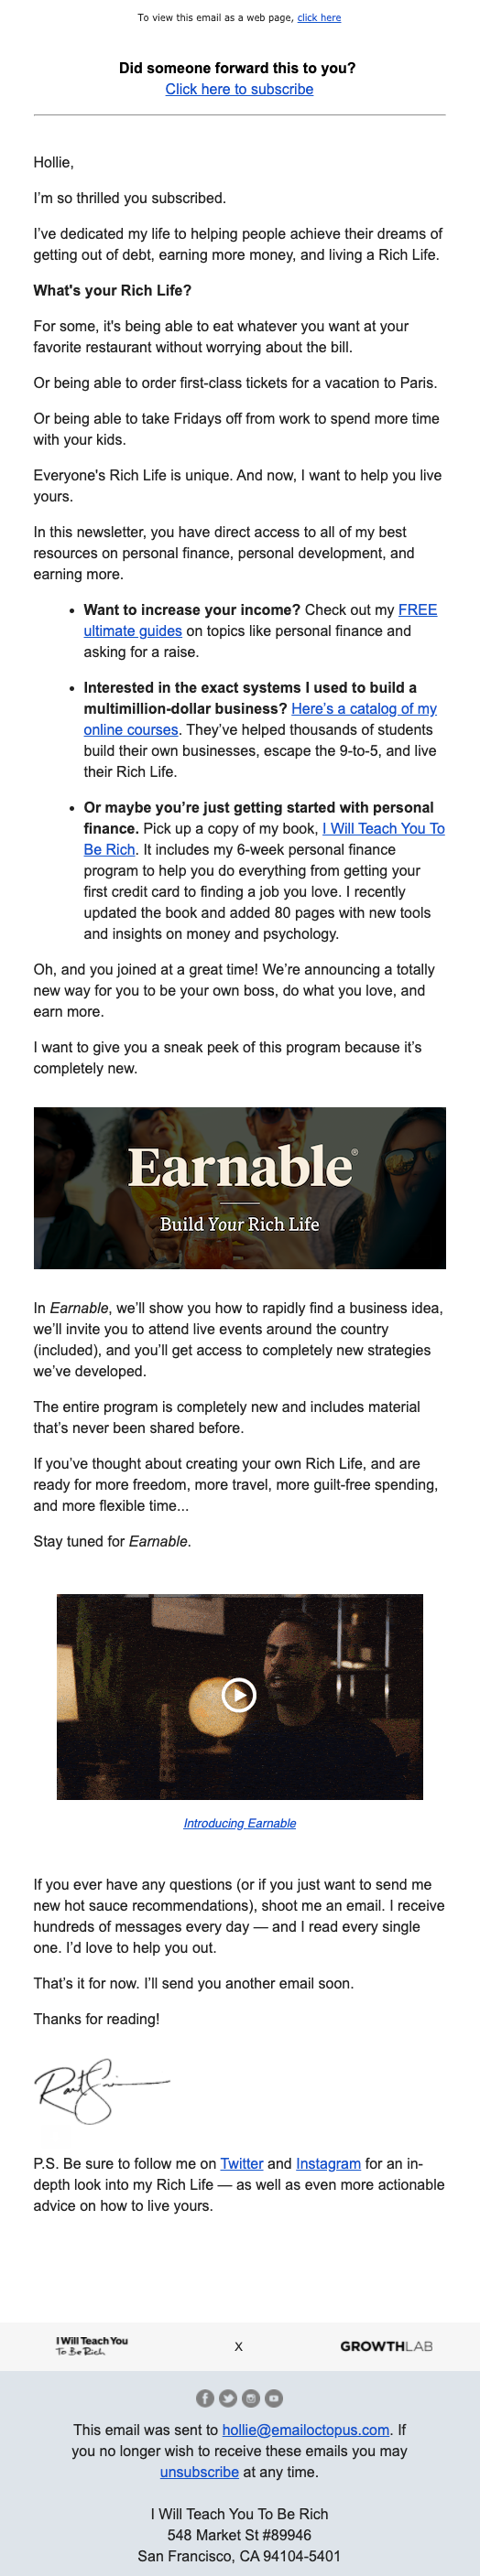 The welcome email sent by finance blogger Ramit Sethi and his website I Will Teach You To Be Rich